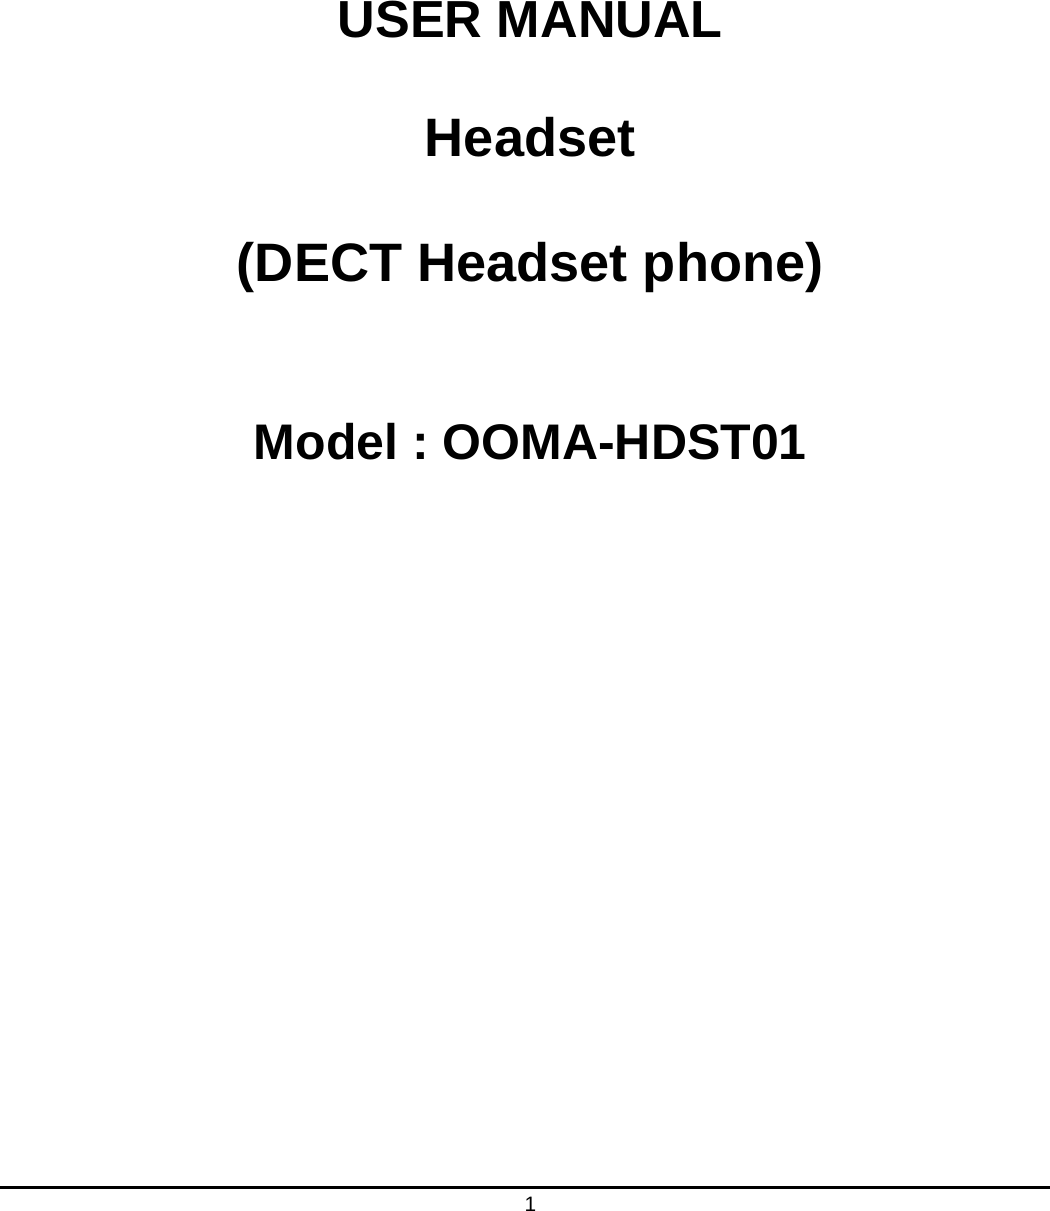   1       USER MANUAL   Headset  (DECT Headset phone)   Model : OOMA-HDST01 